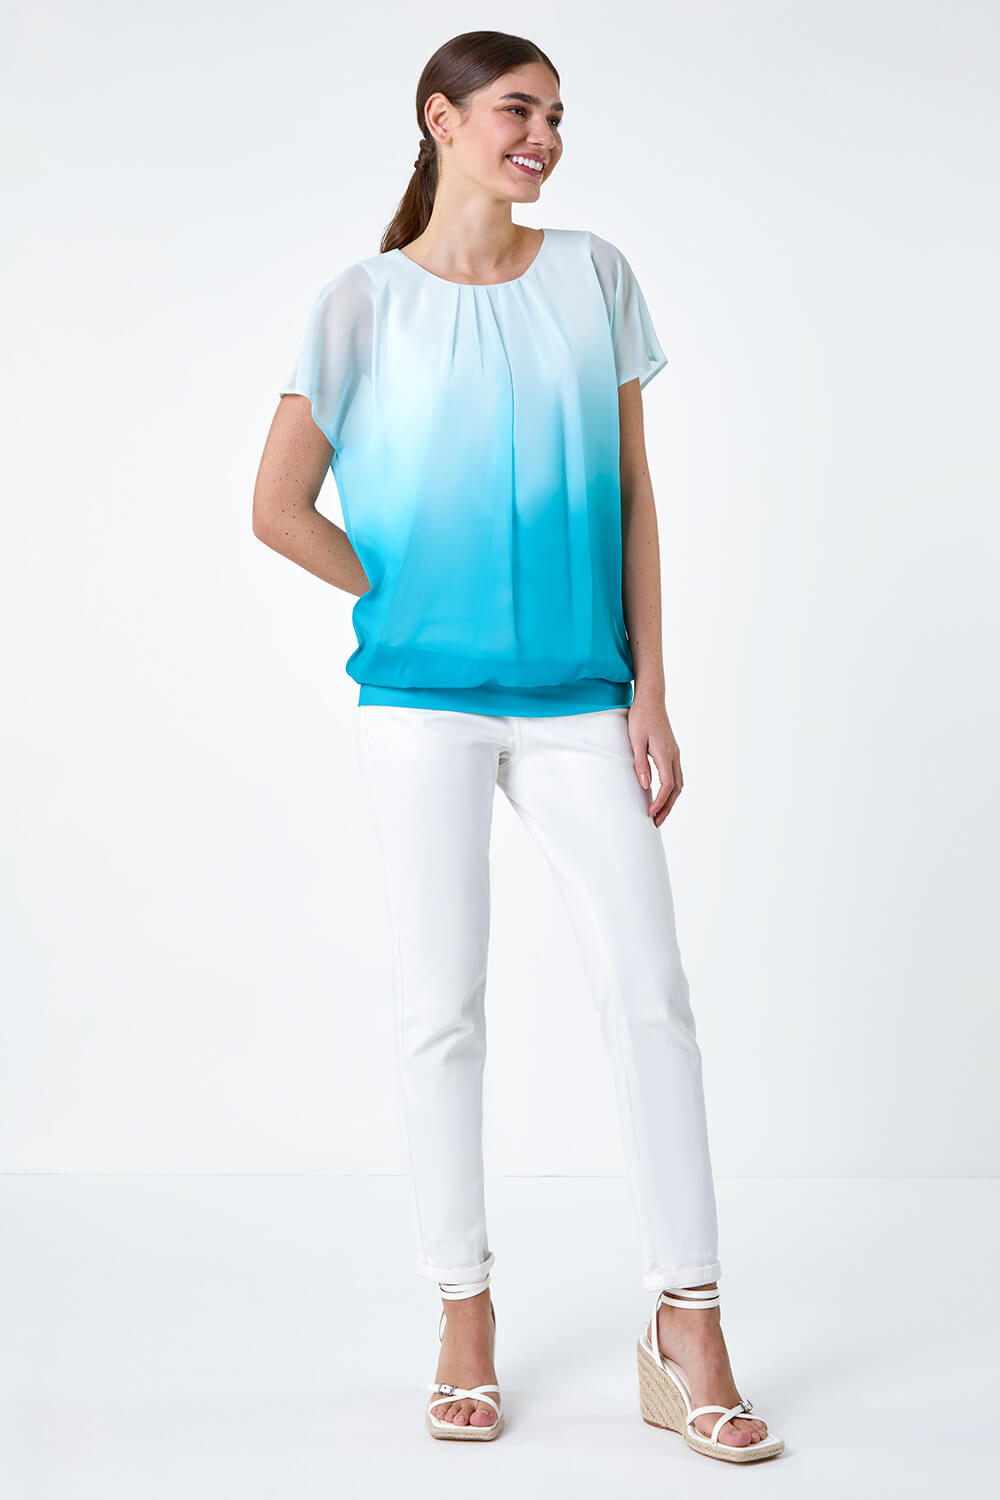 Blue Ombre Chiffon Overlay Blouson Top, Image 2 of 5